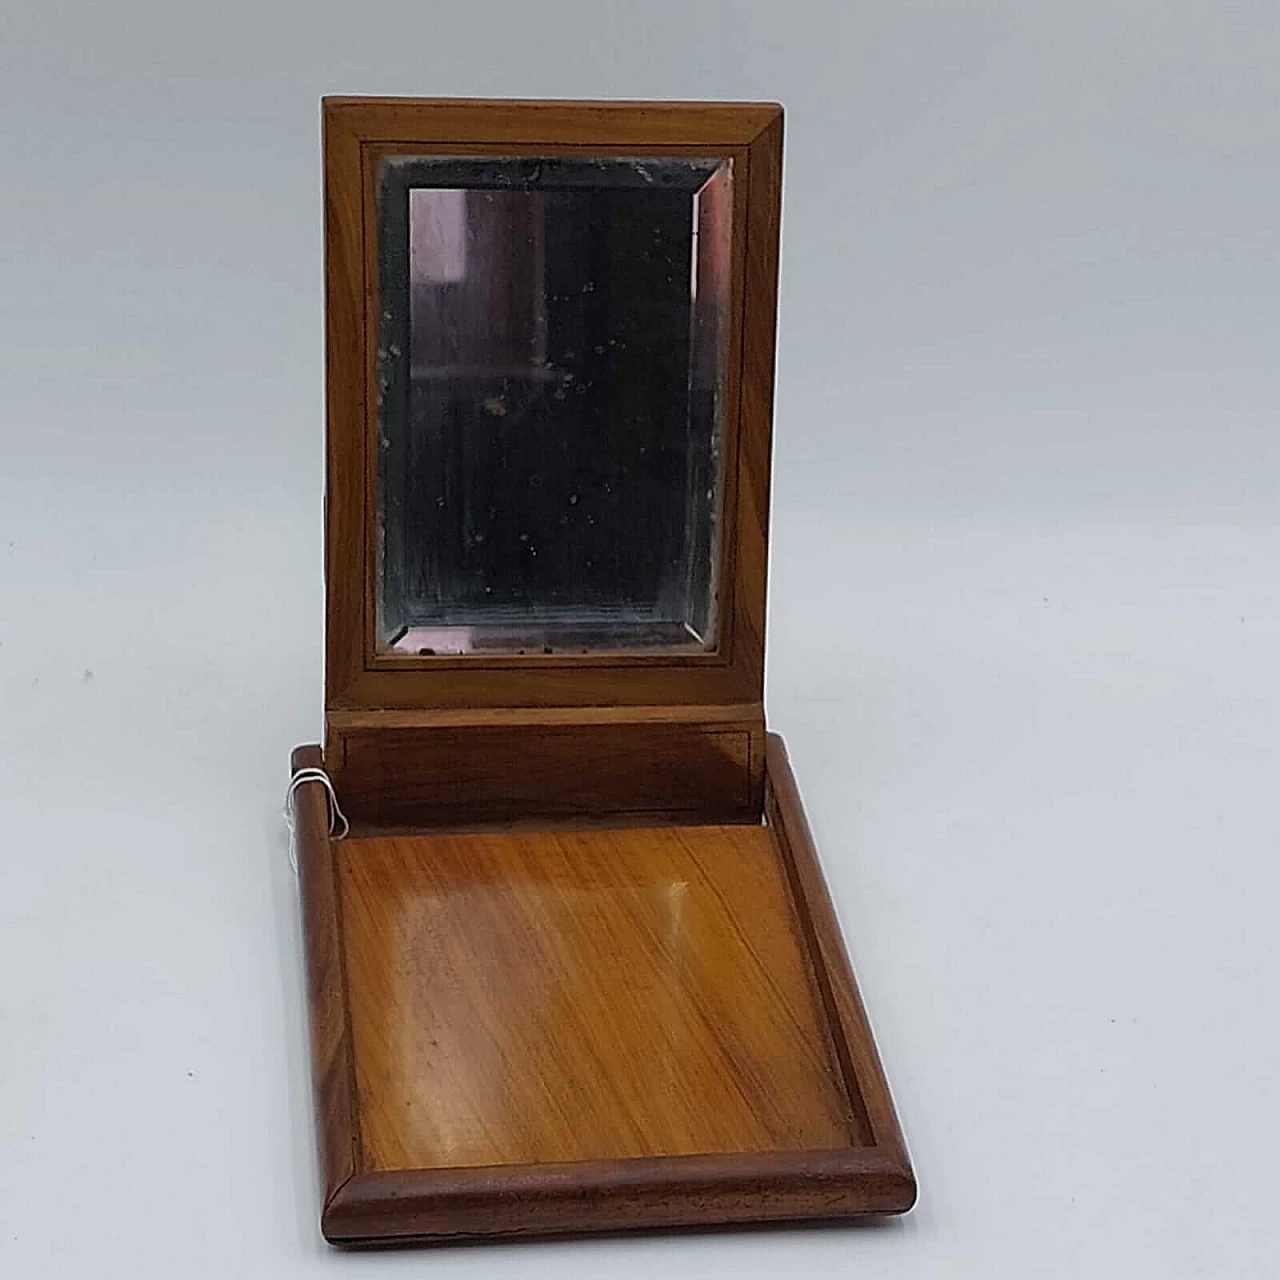 Olive wood travel mirror, early 20th century 2